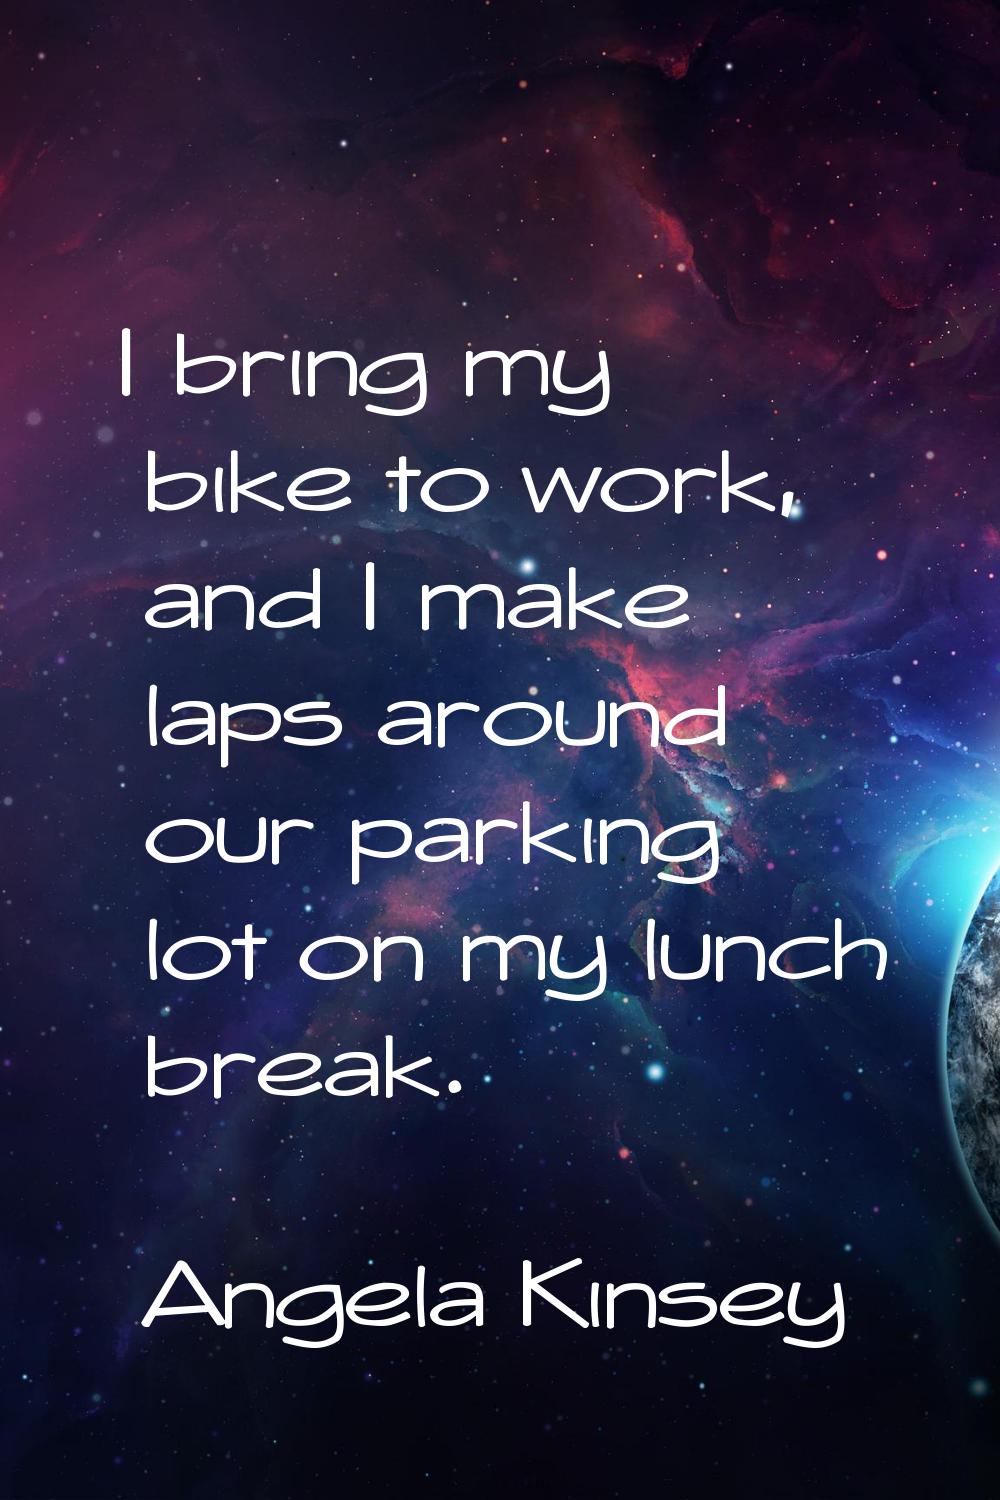 I bring my bike to work, and I make laps around our parking lot on my lunch break.